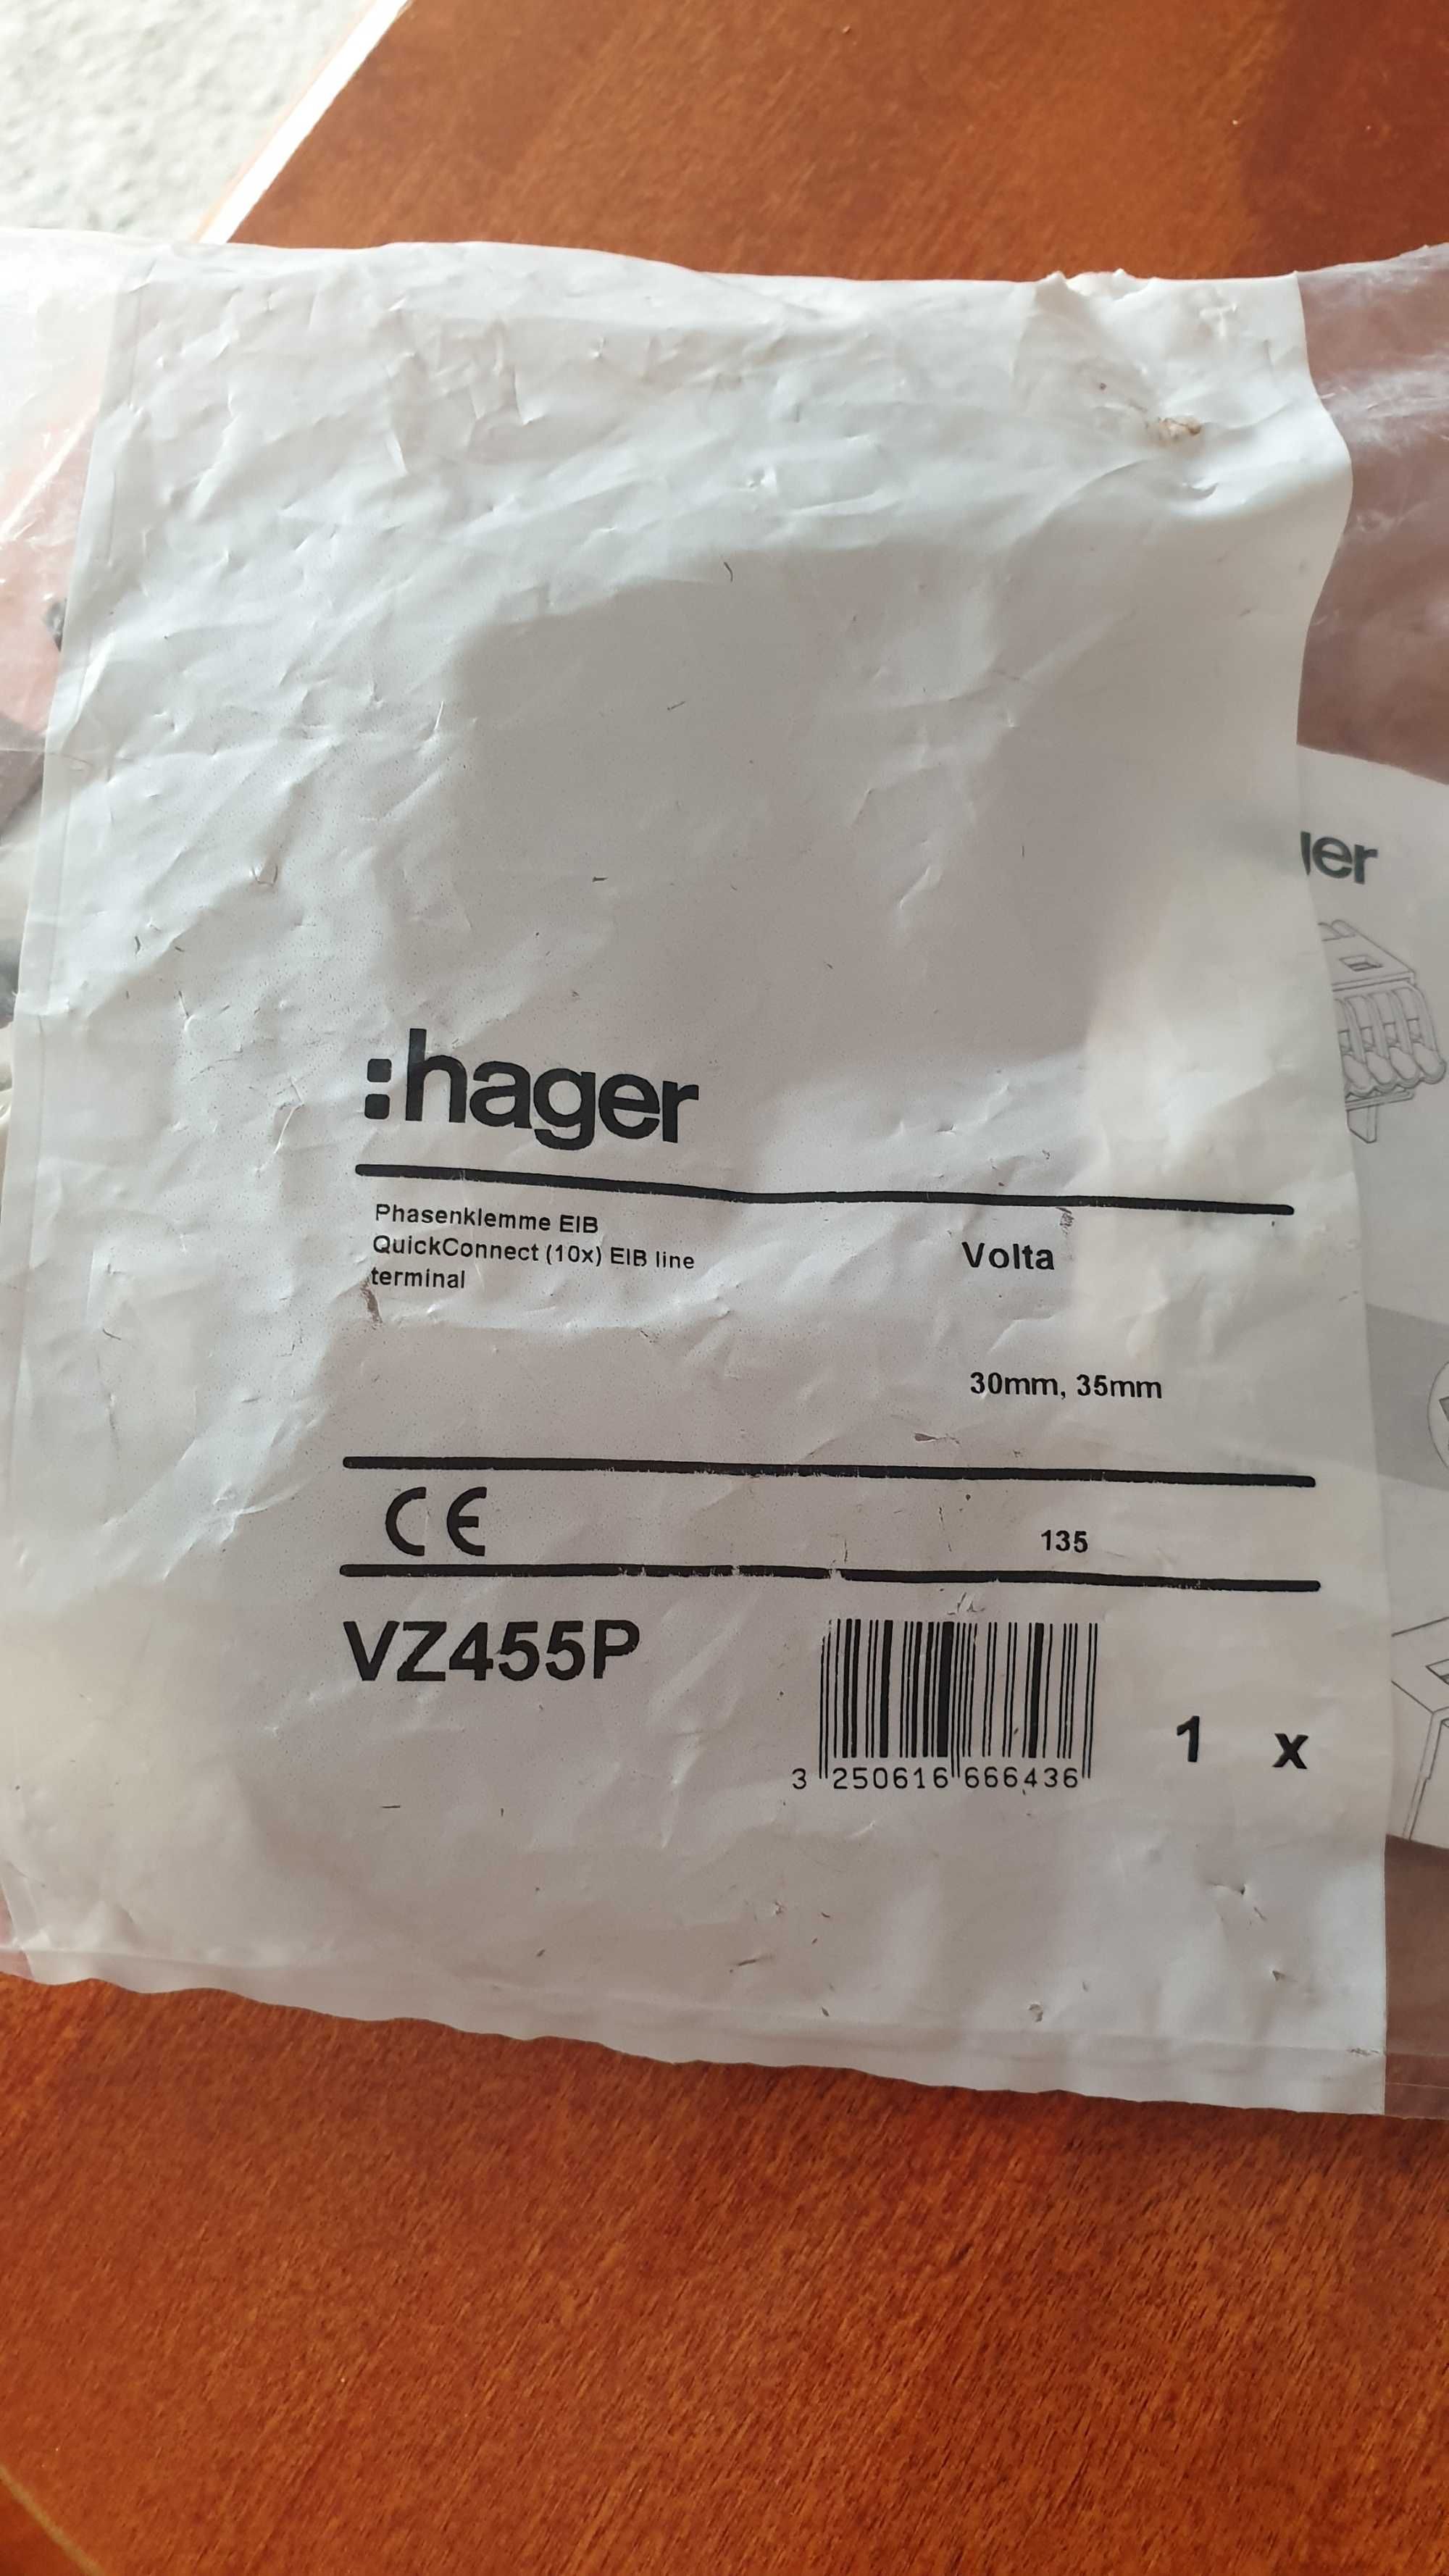 HAGER QuickConnect zacisk fazowy VZ455P  (5x1,5 - 4mm2)